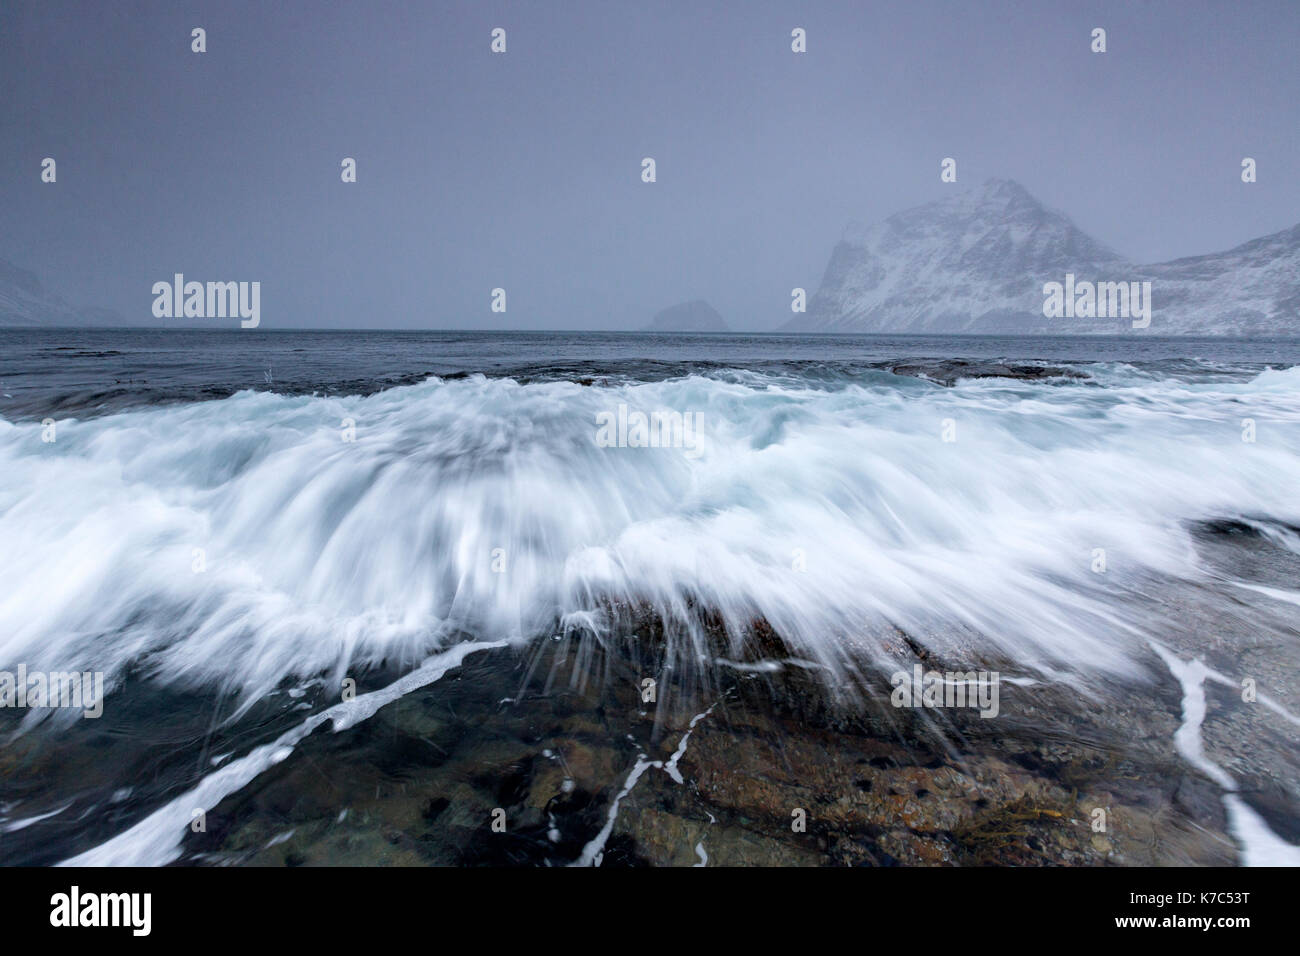 Waves crashing on the rocks of the cold sea. Haukland. Lofoten Islands Northern Norway Europe Stock Photo